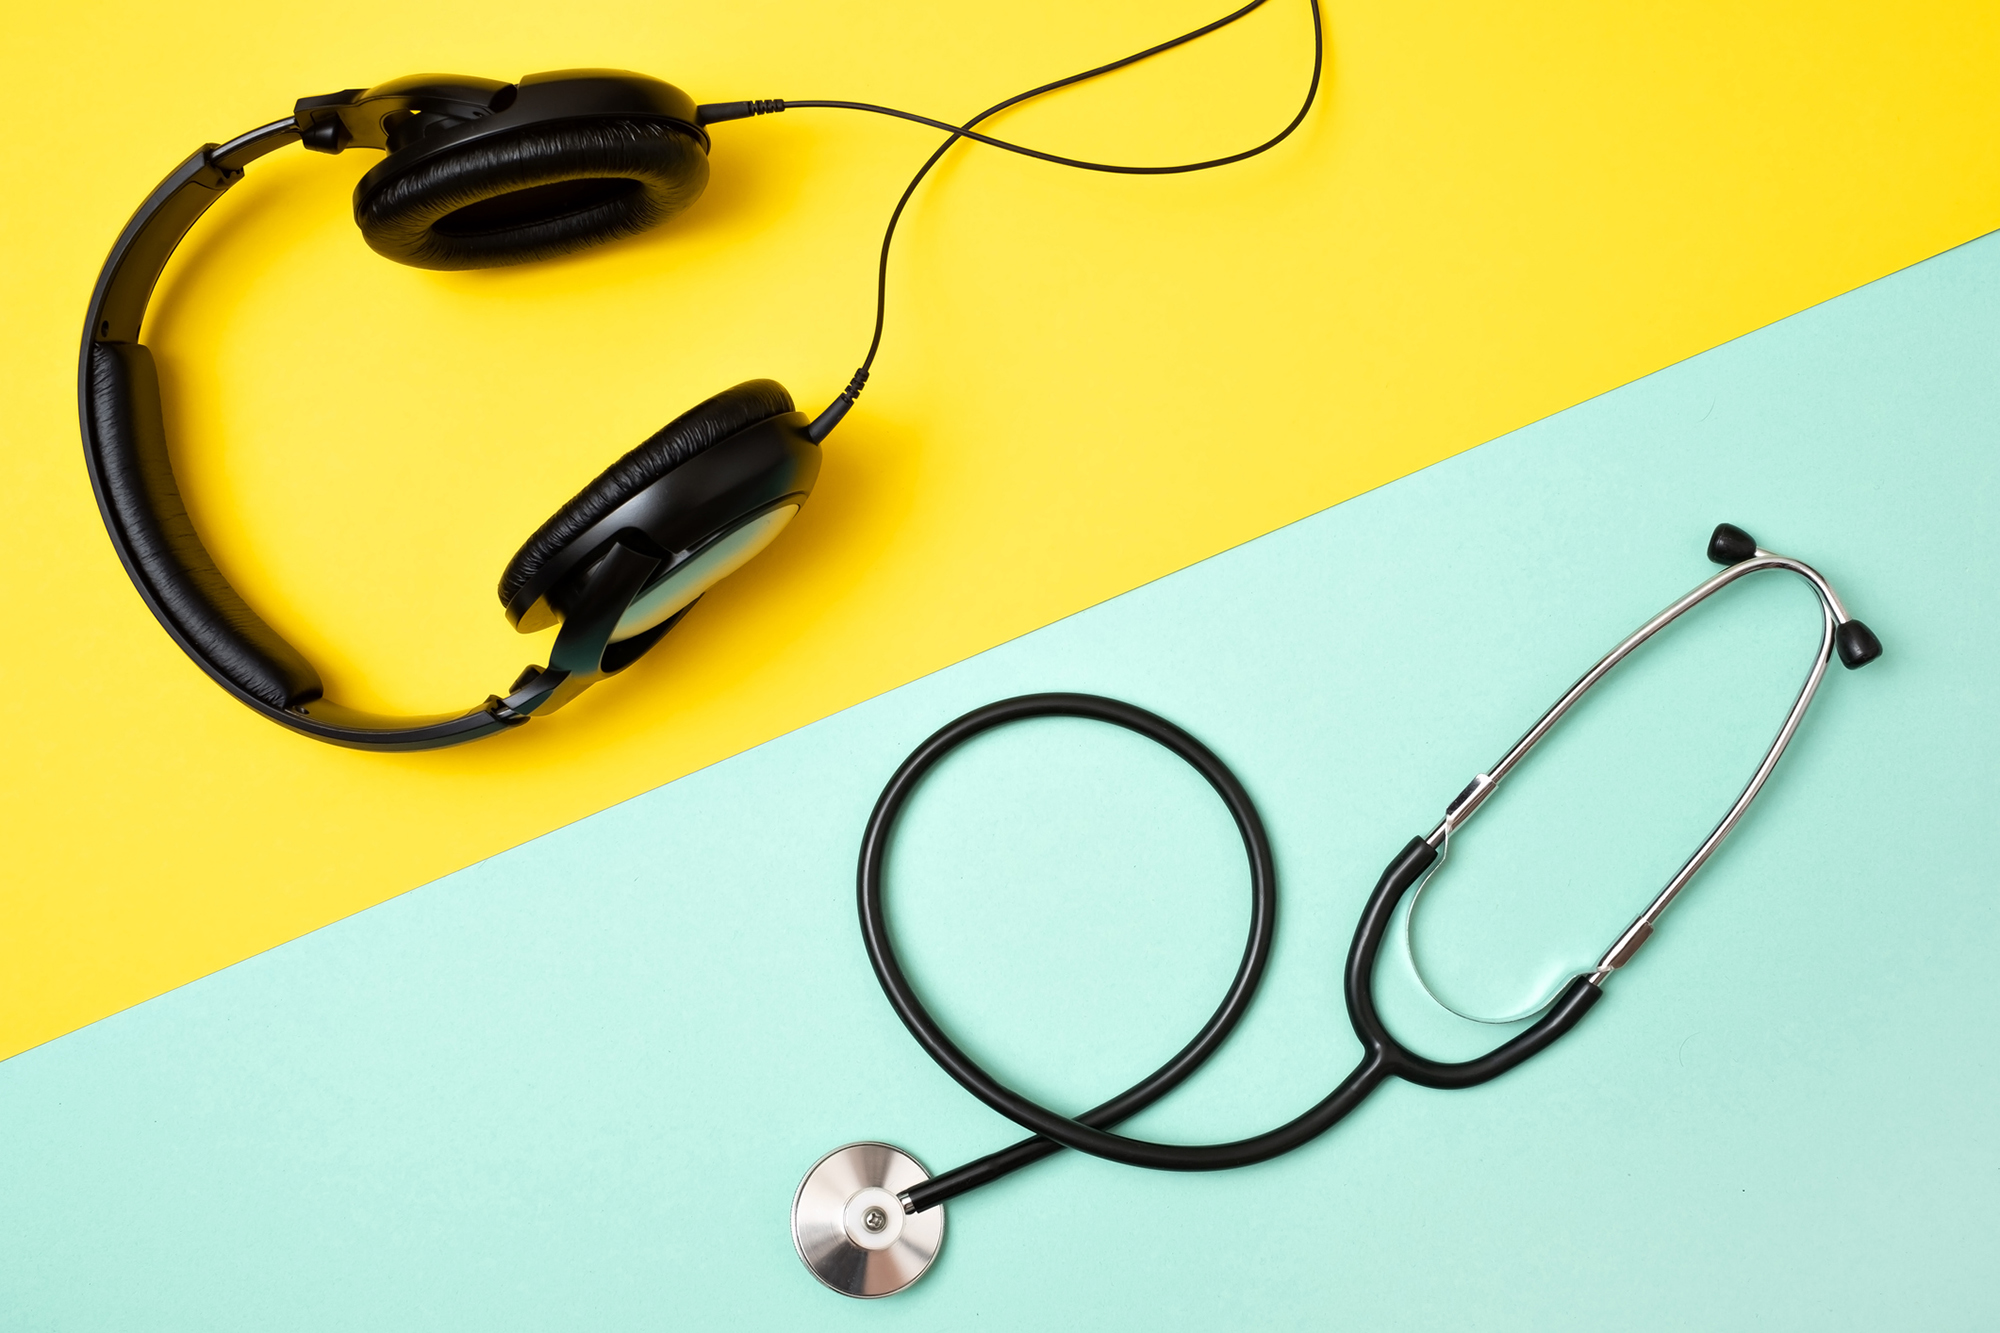 Headphones and a stethoscope on a table.